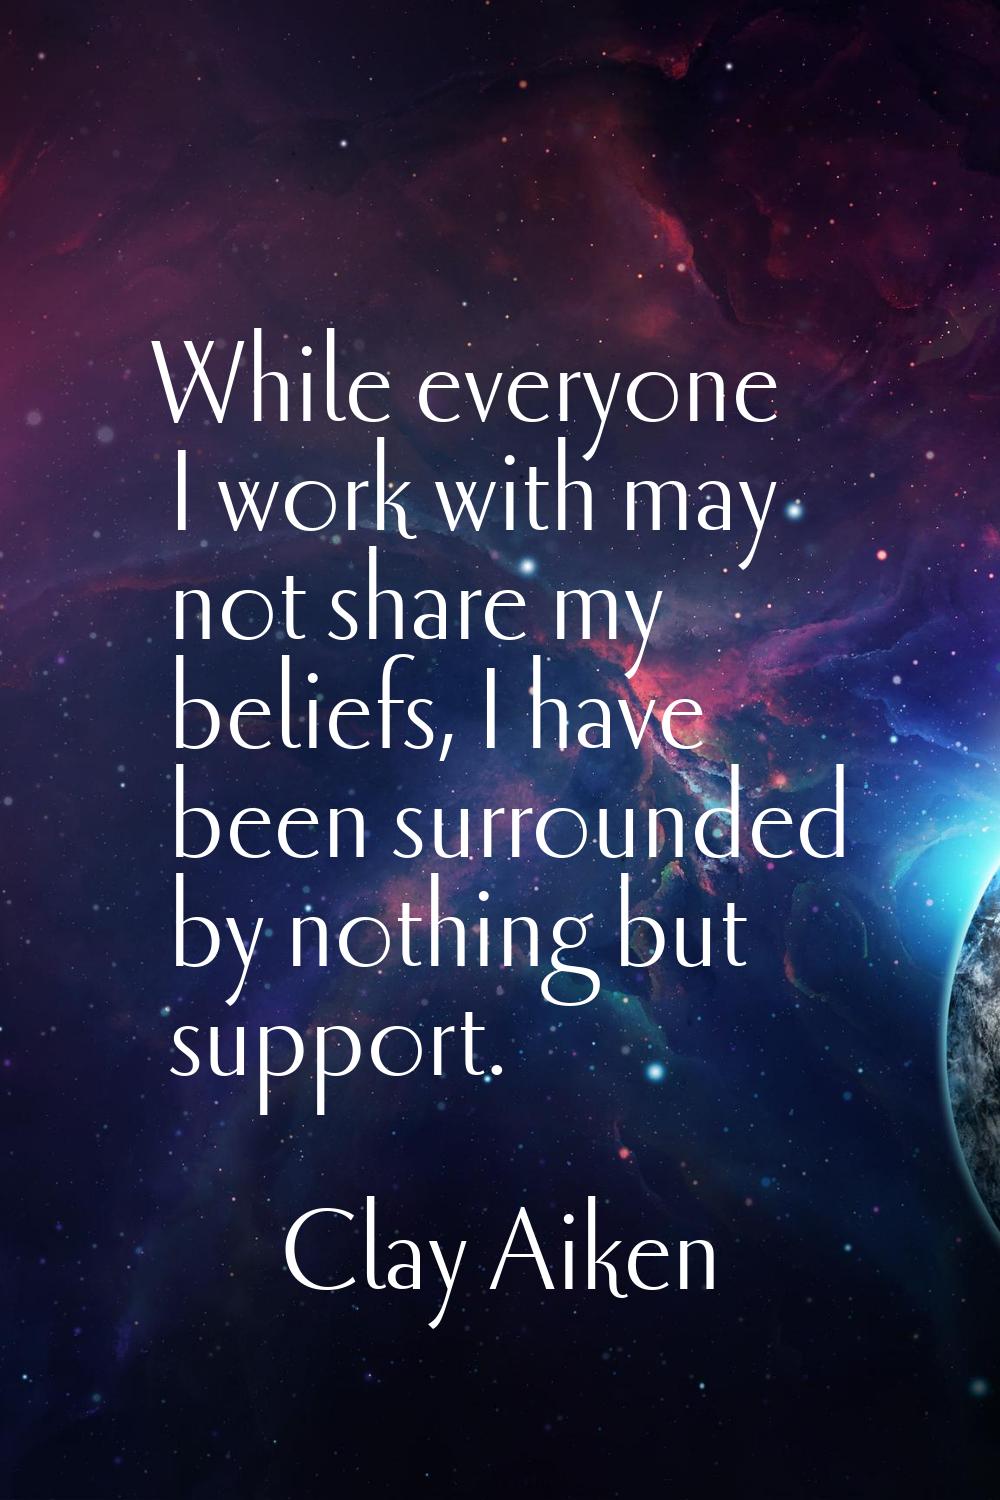 While everyone I work with may not share my beliefs, I have been surrounded by nothing but support.